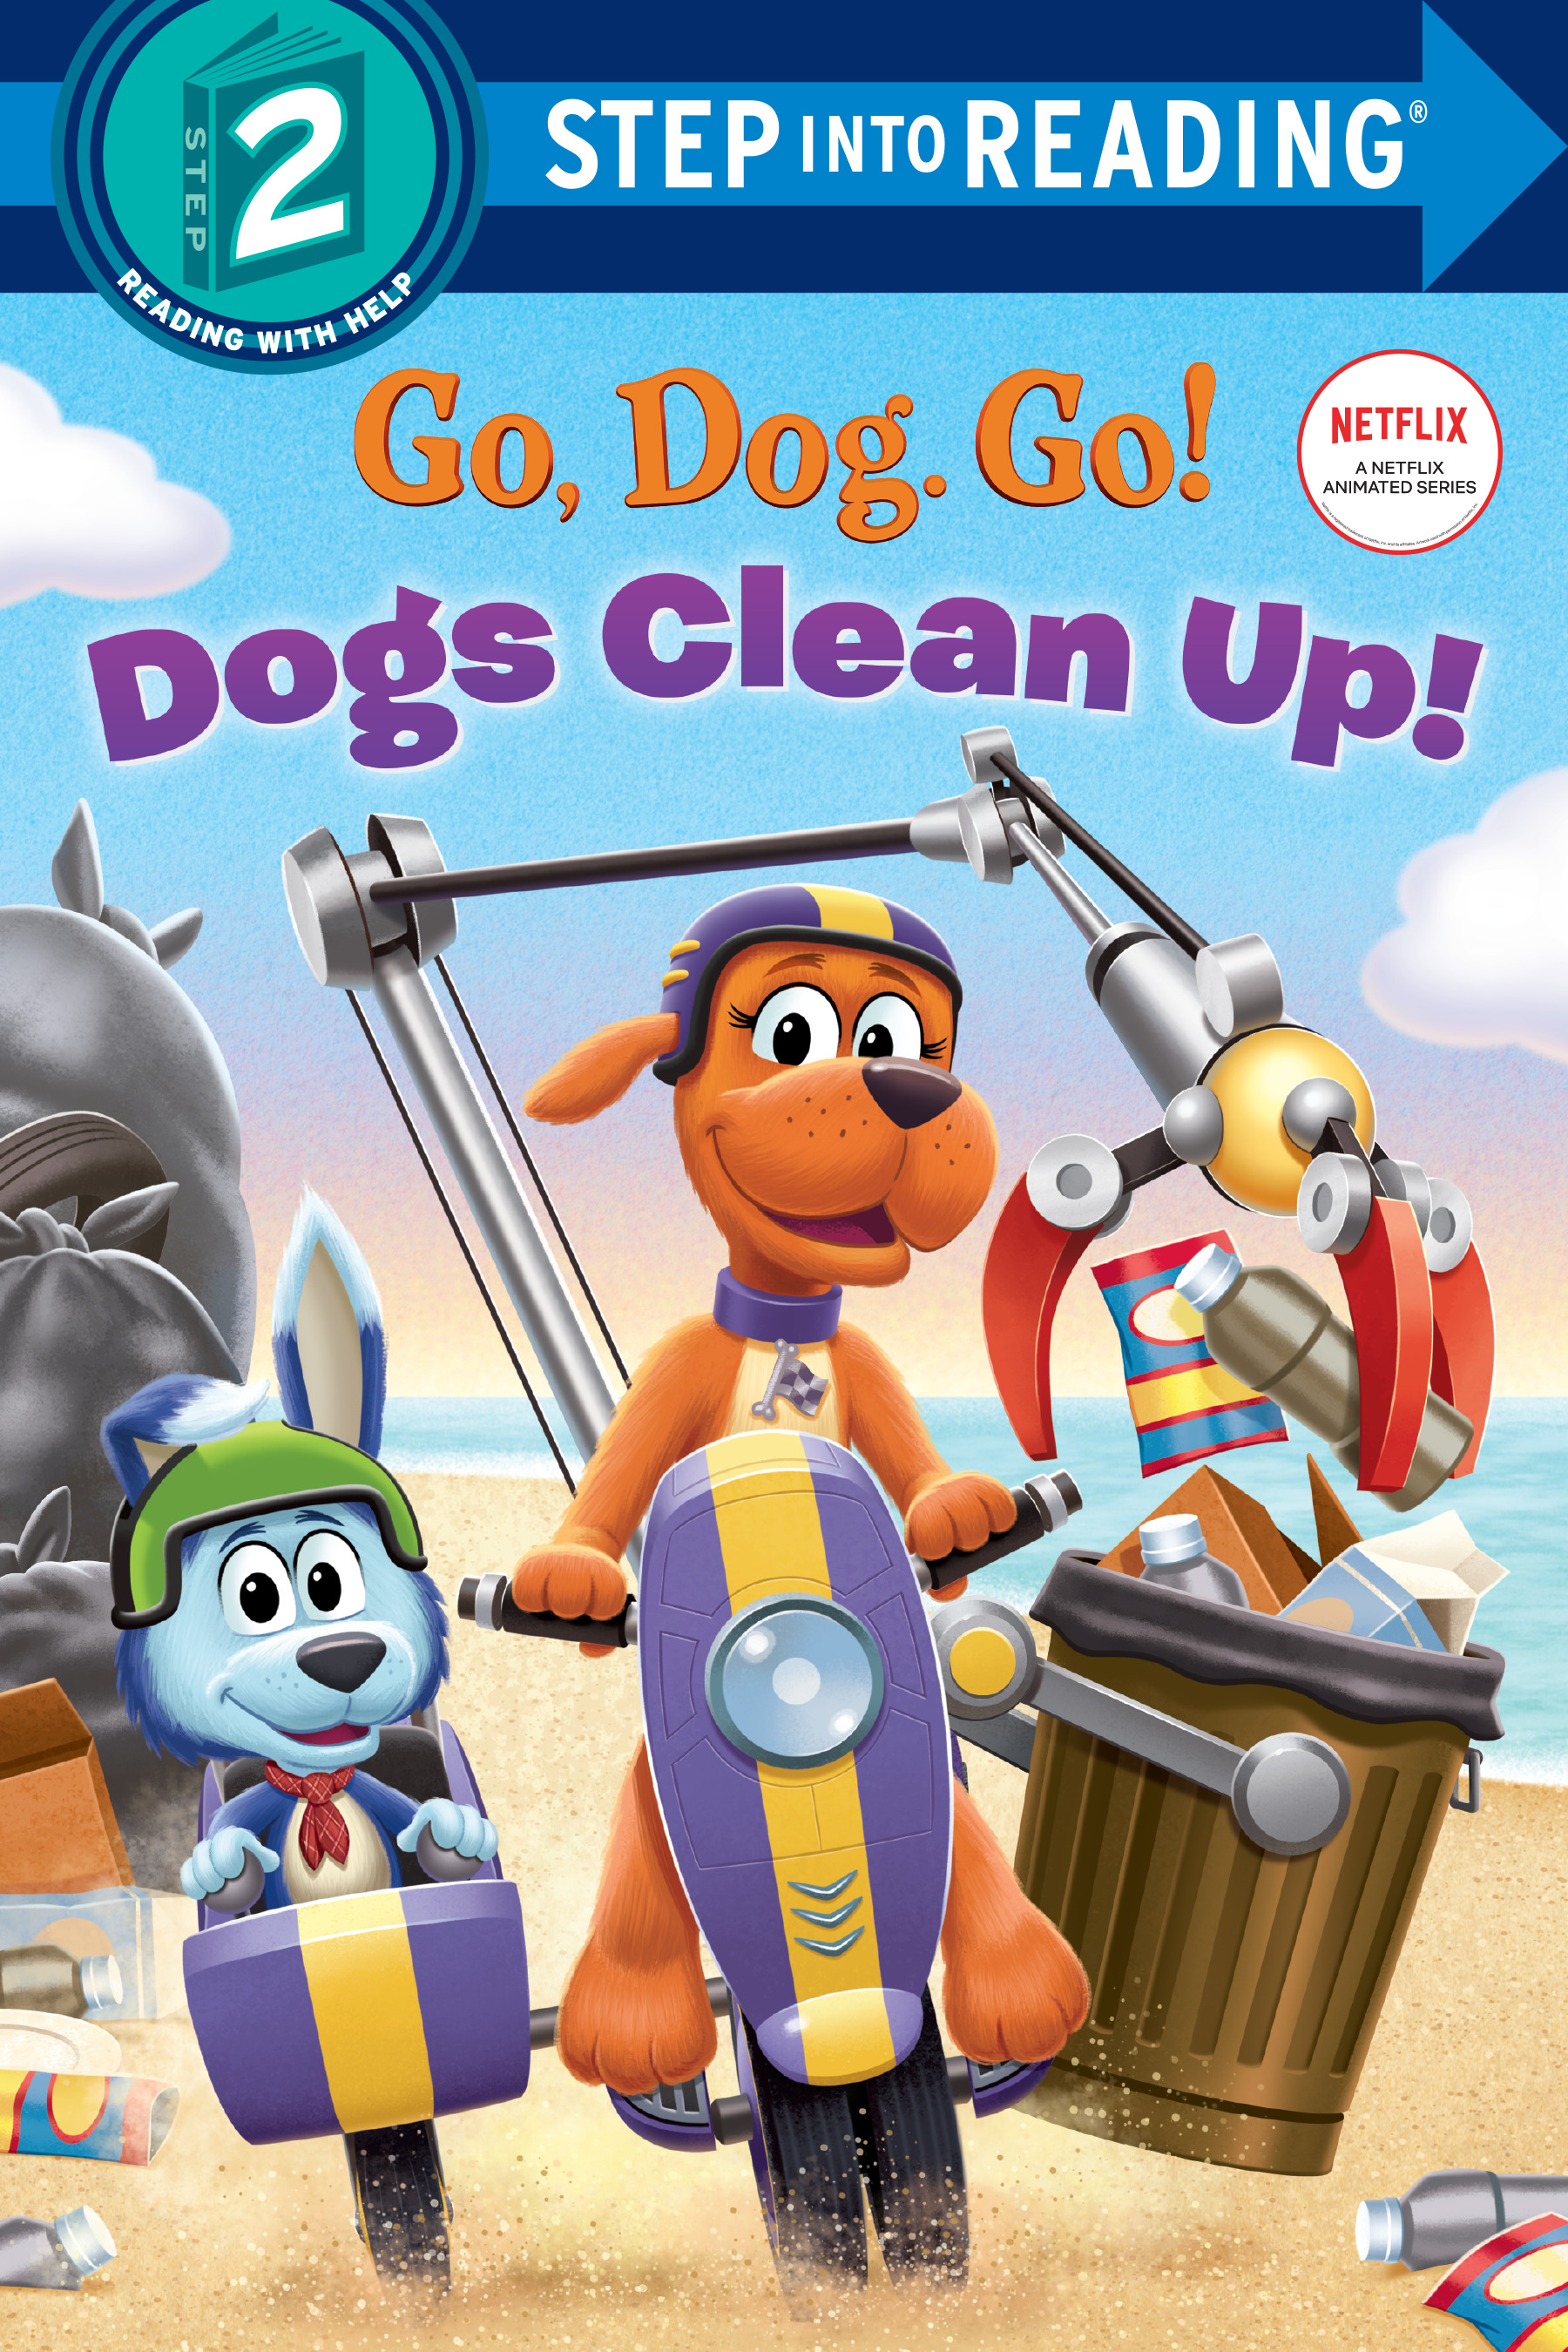 Step Into Reading - Dogs Clean Up! (Netflix: Go, Dog. Go!) | First reader